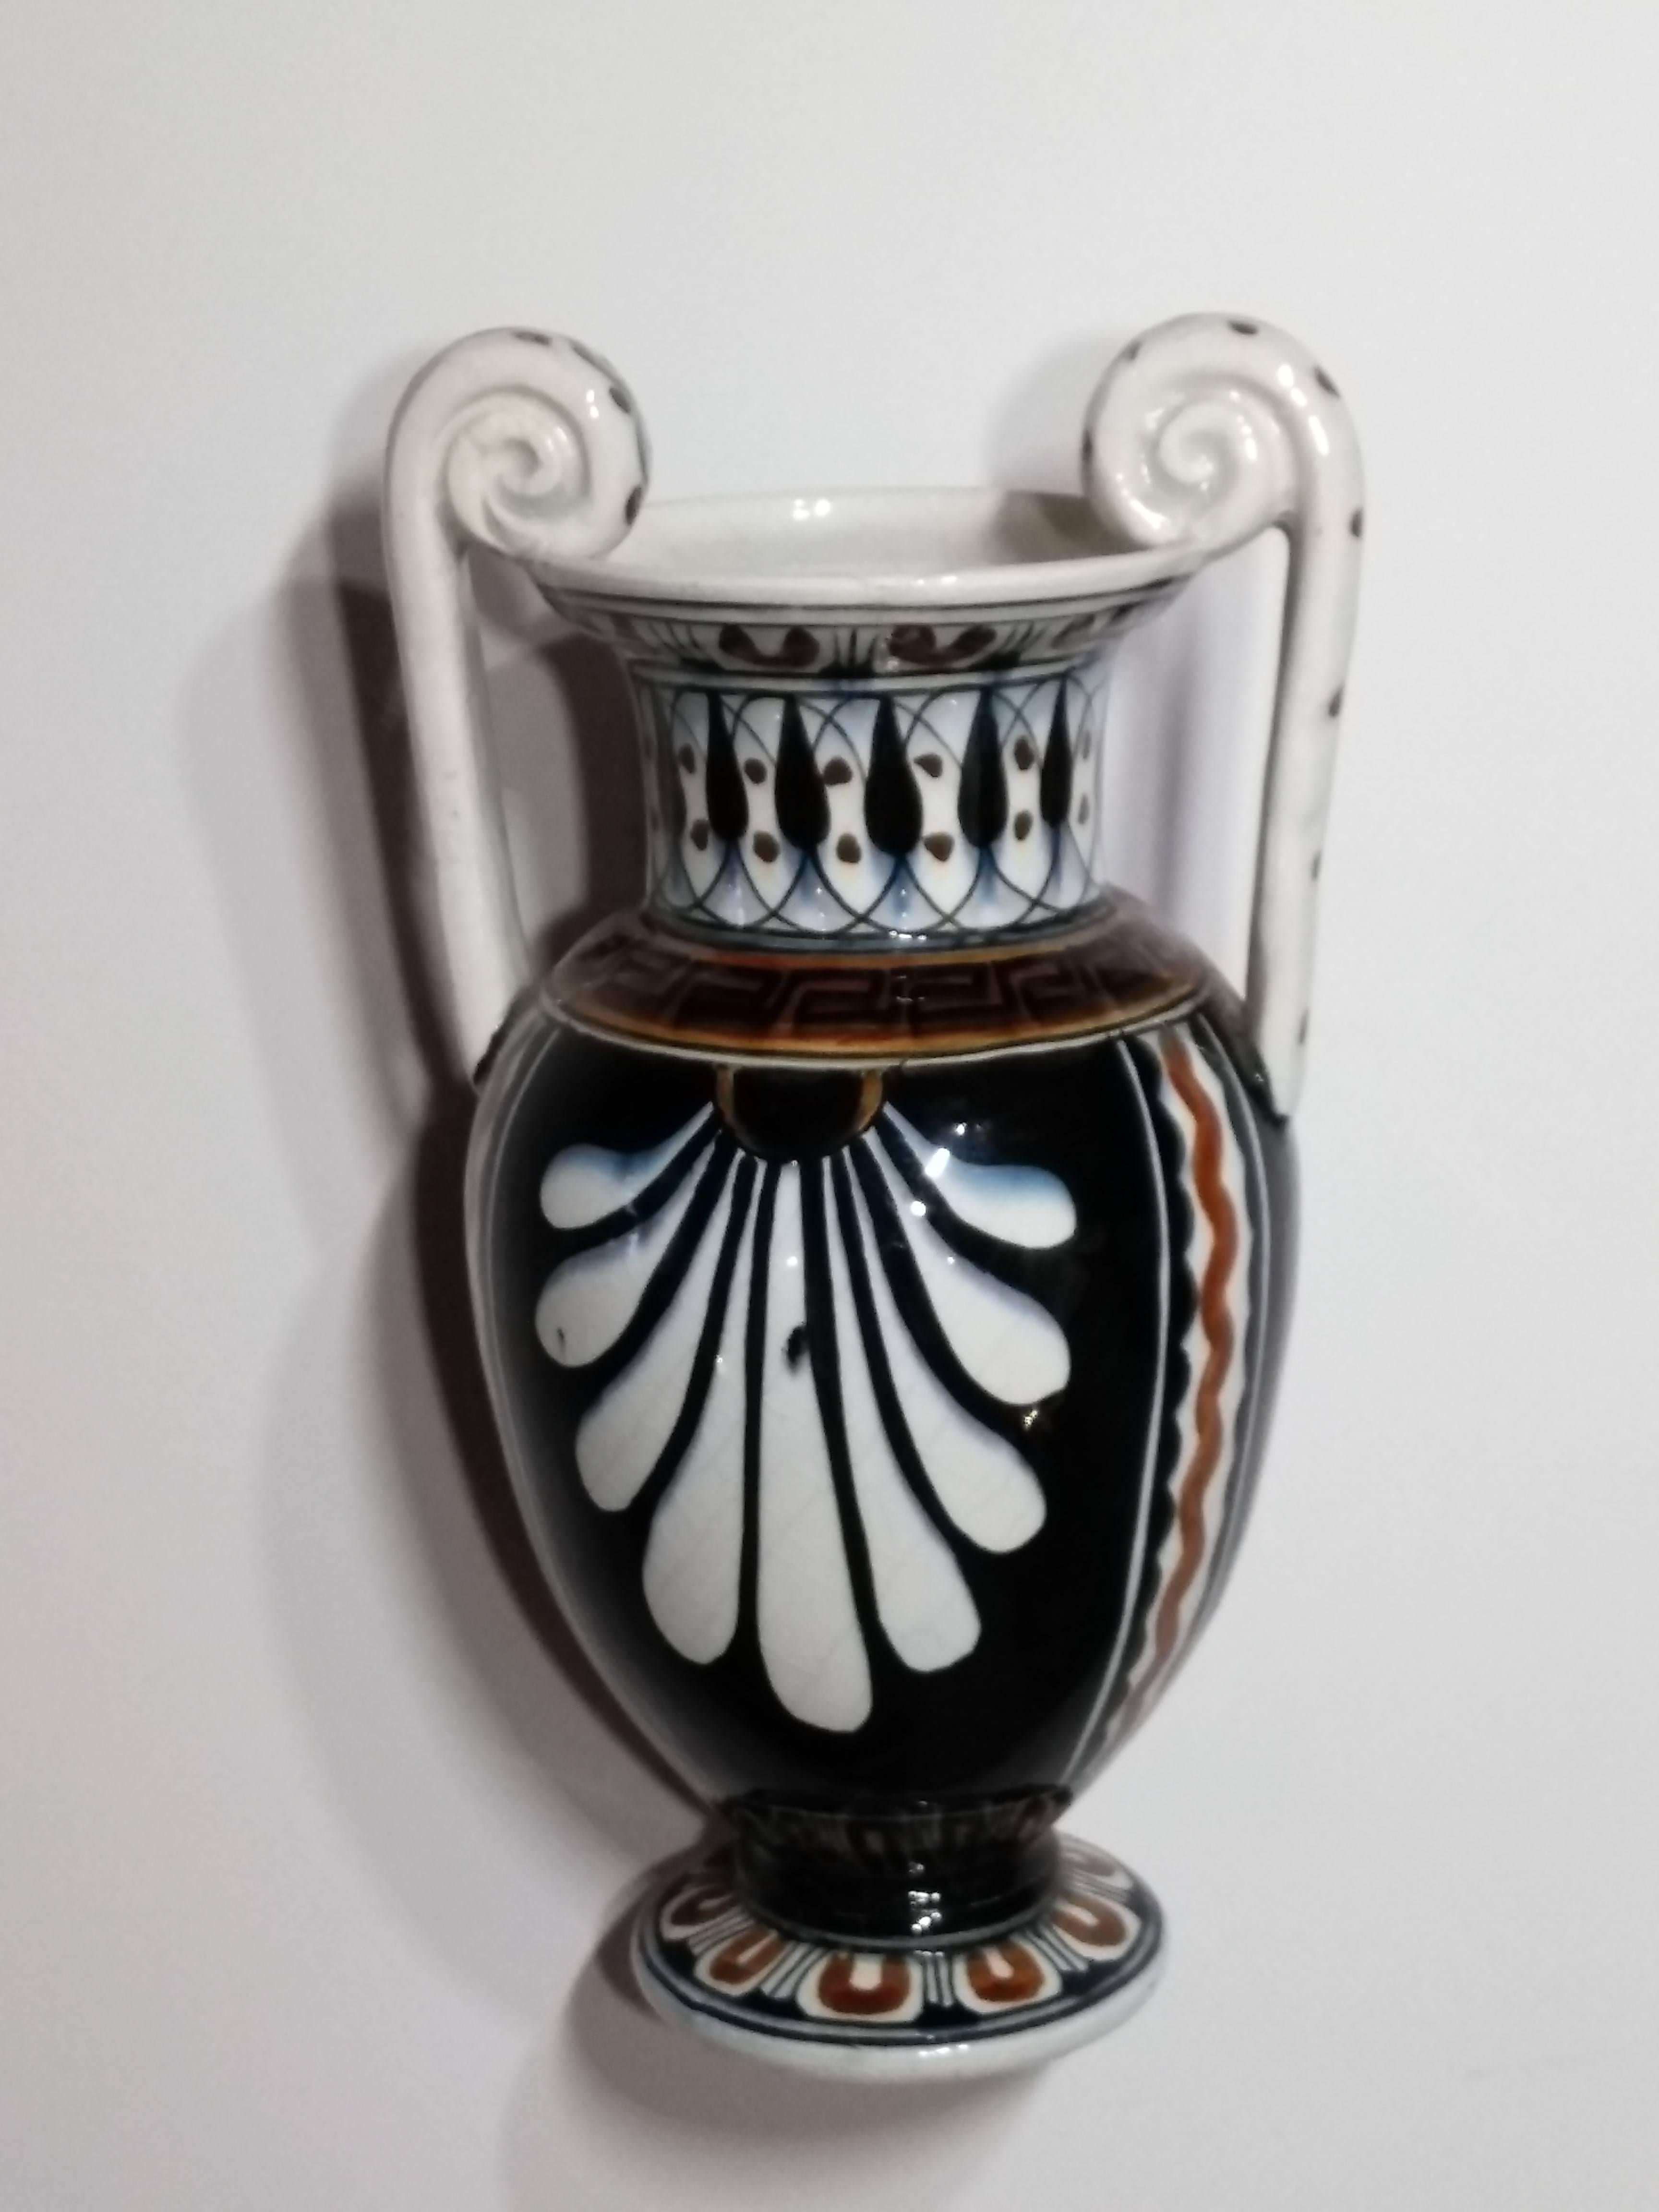 Beautiful classical porcelain vase with Greek key accent design. This case features a man and woman looking at each other. The vase has two curved decorative handles and hand-painted details all around. 

Marked on the bottom.
 